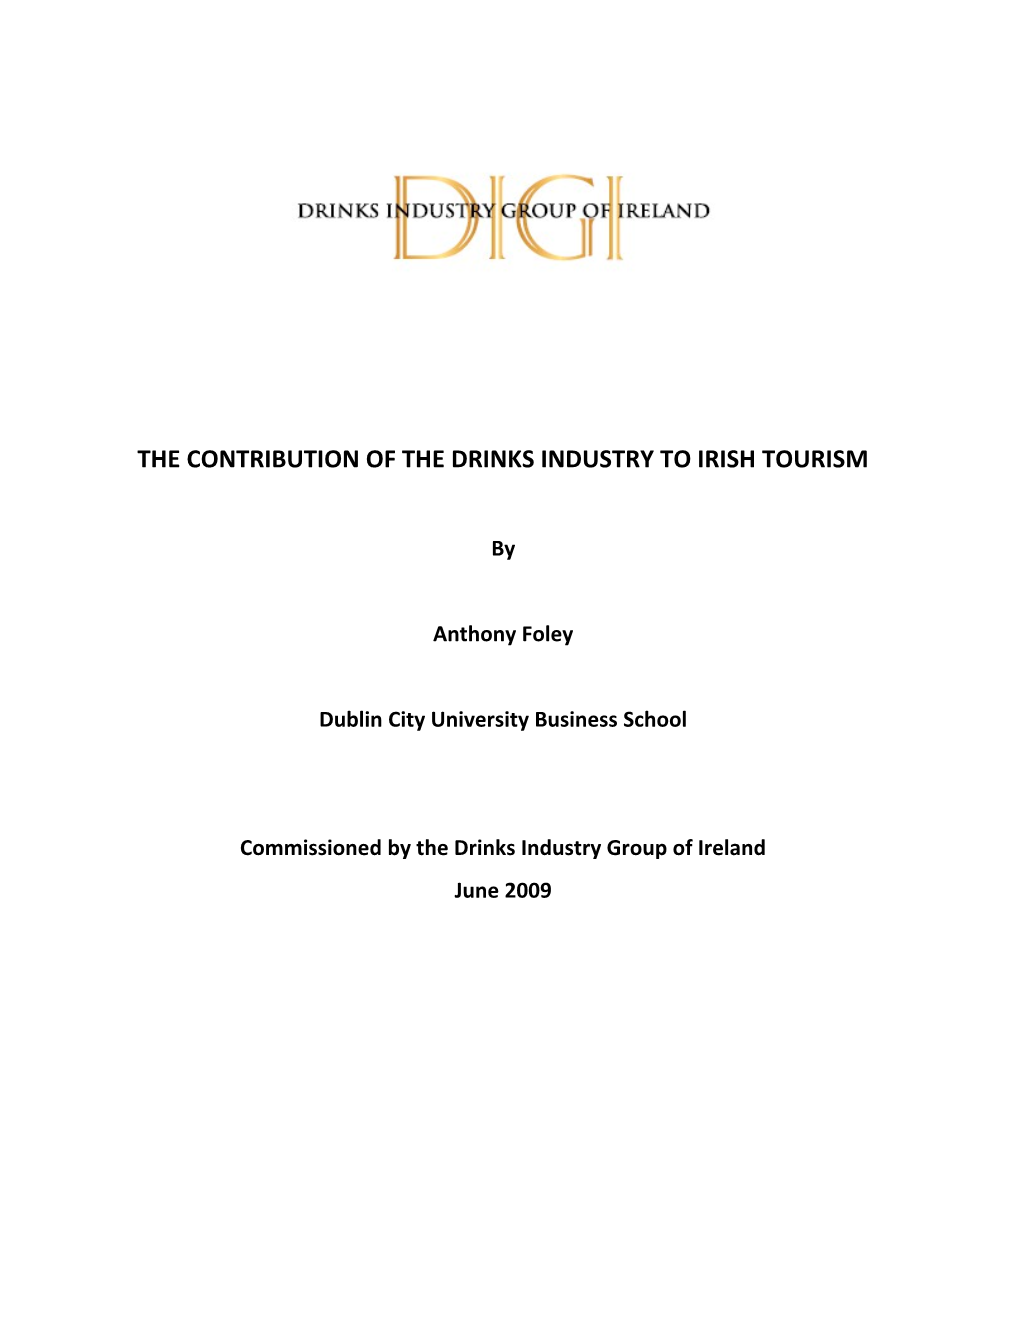 The Contribution of the Drinks Industry to Irish Tourism